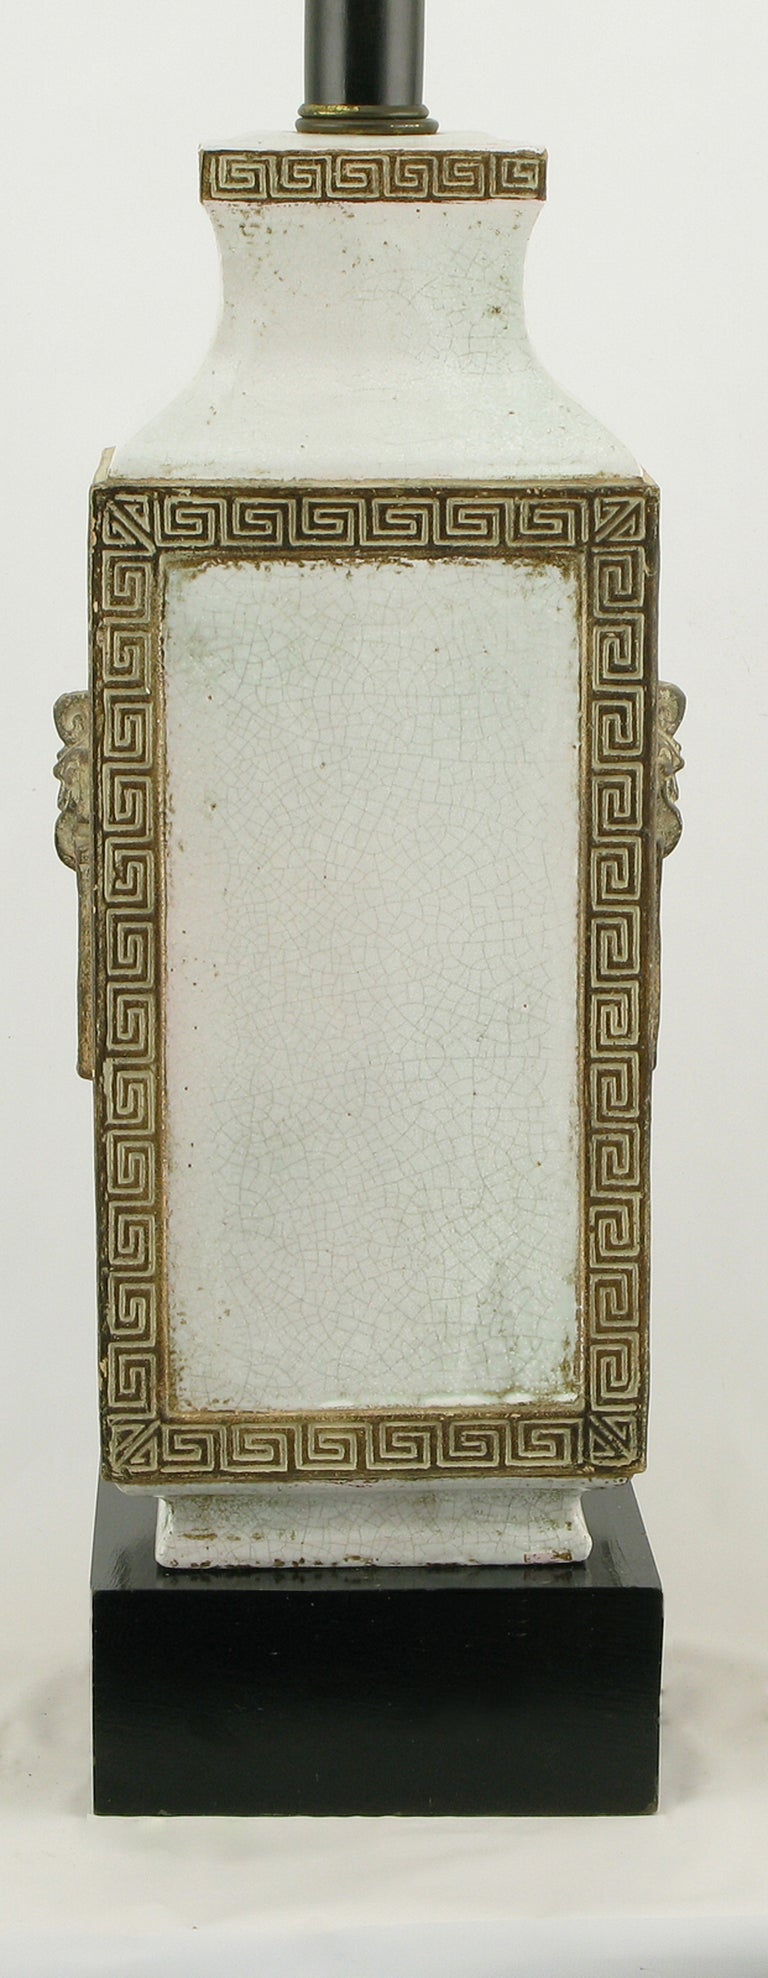 Neoclassical Crackle Glaze & Parcel Gilt Greek Key Table Lamp In Good Condition For Sale In Chicago, IL